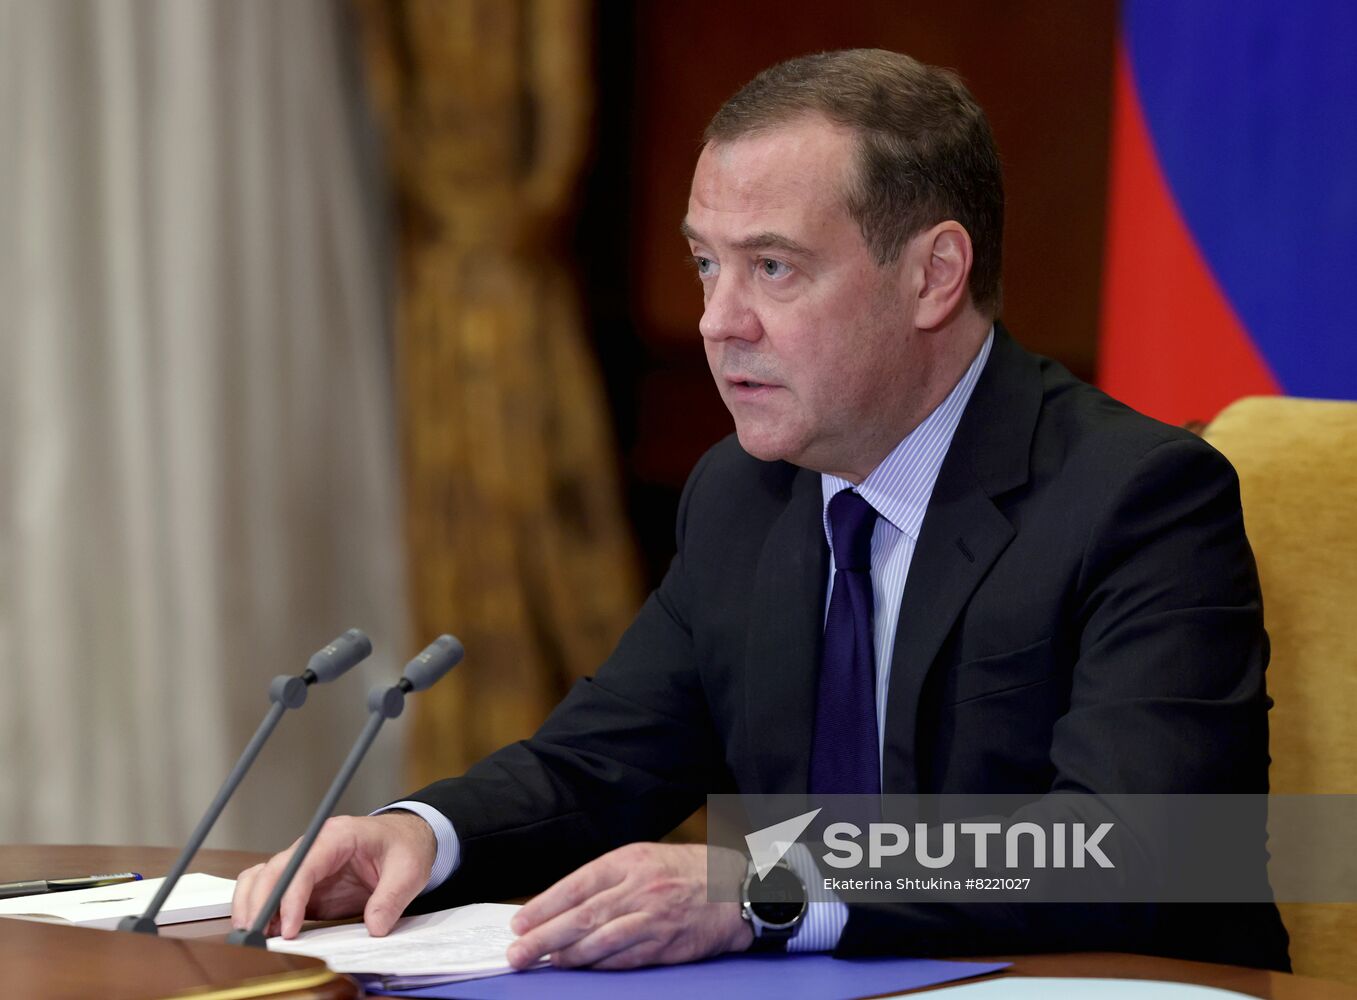 Russia Medvedev State Technological Sovereignty